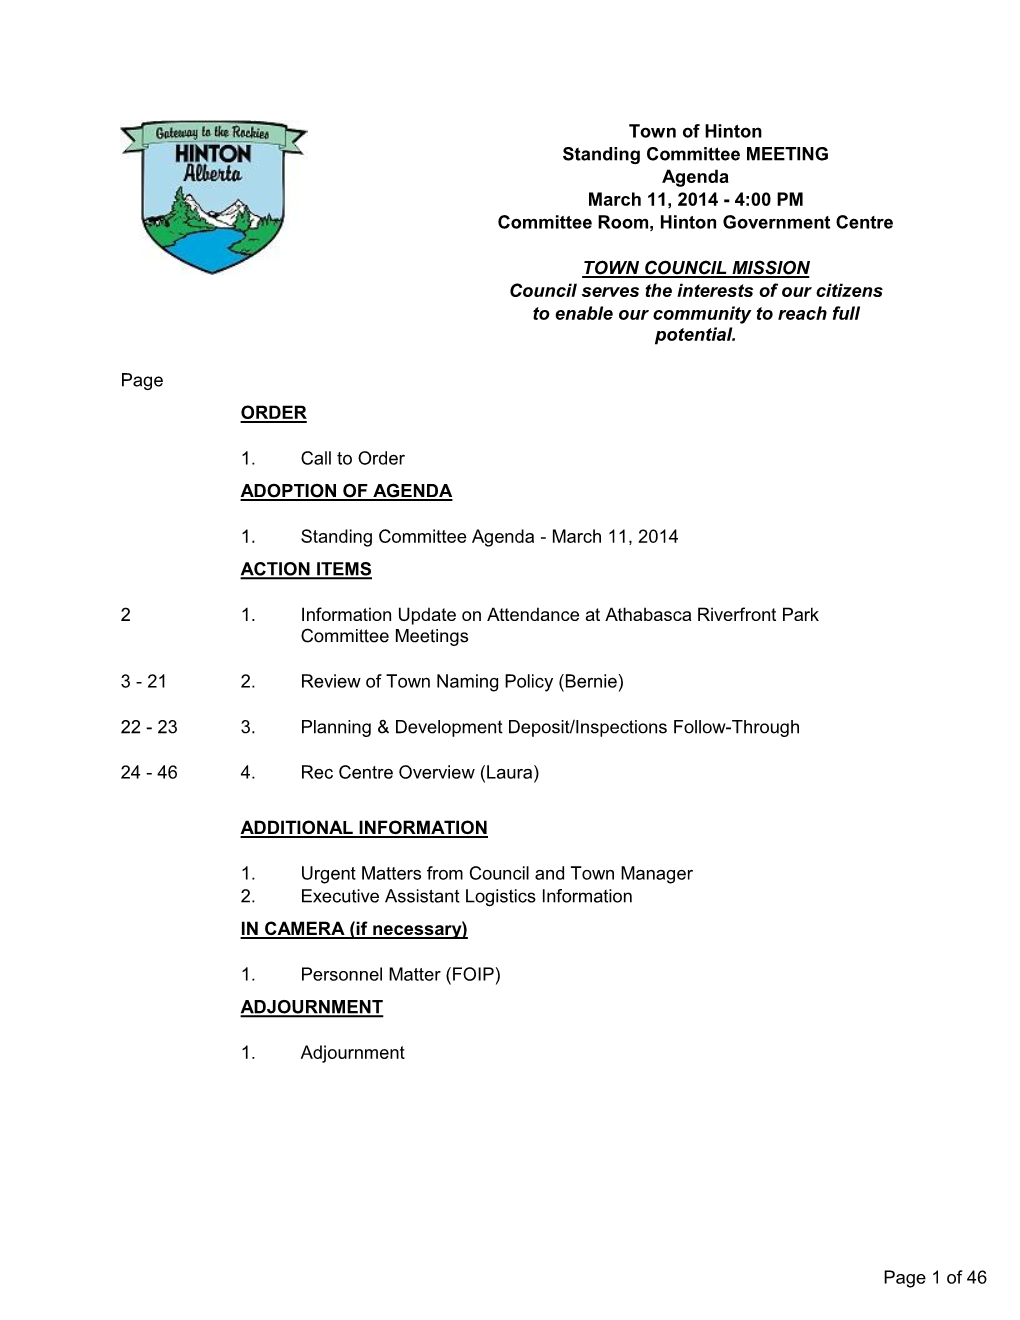 Town of Hinton Standing Committee MEETING Agenda March 11, 2014 - 4:00 PM Committee Room, Hinton Government Centre